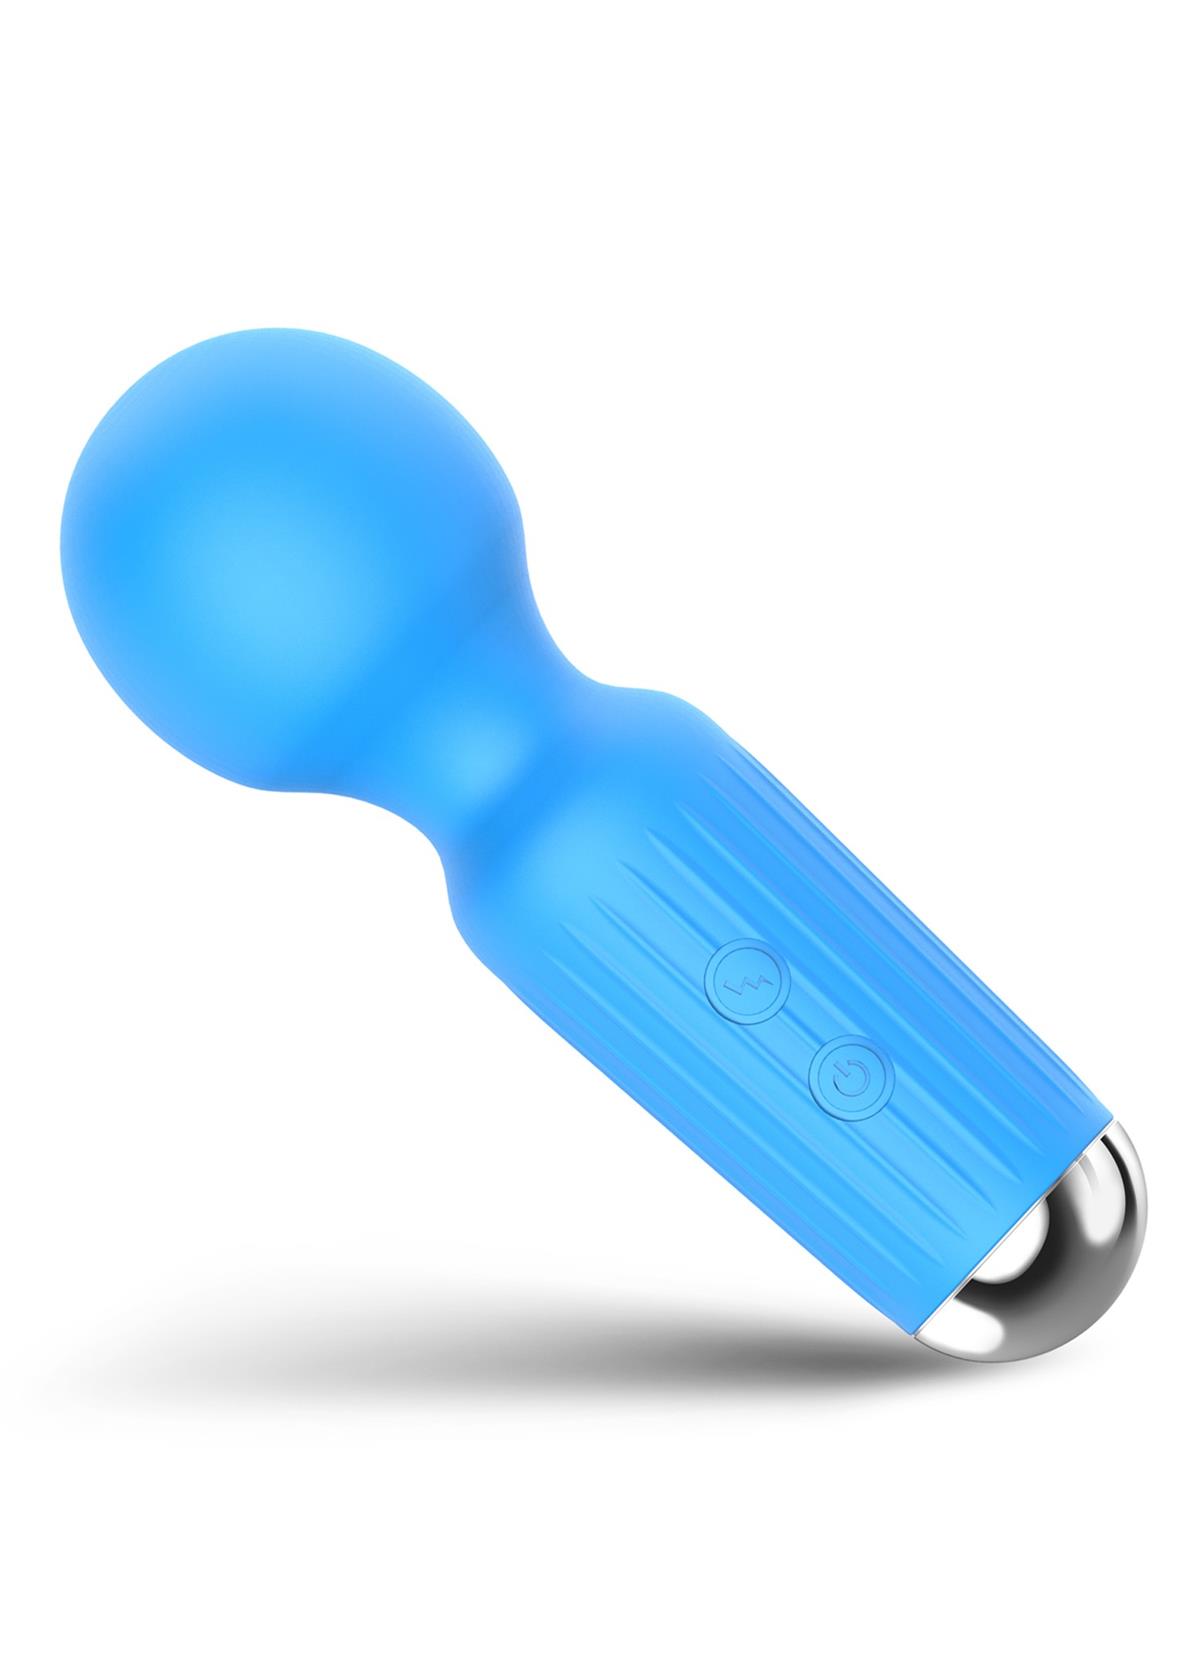 Bossoftoys - 22-00041 - Mini Massager vibrator - 20 Functions - Silicone - 11 cm -  dia 3,7 cm - Rechargeable - attractive Colour windowbox - Blue